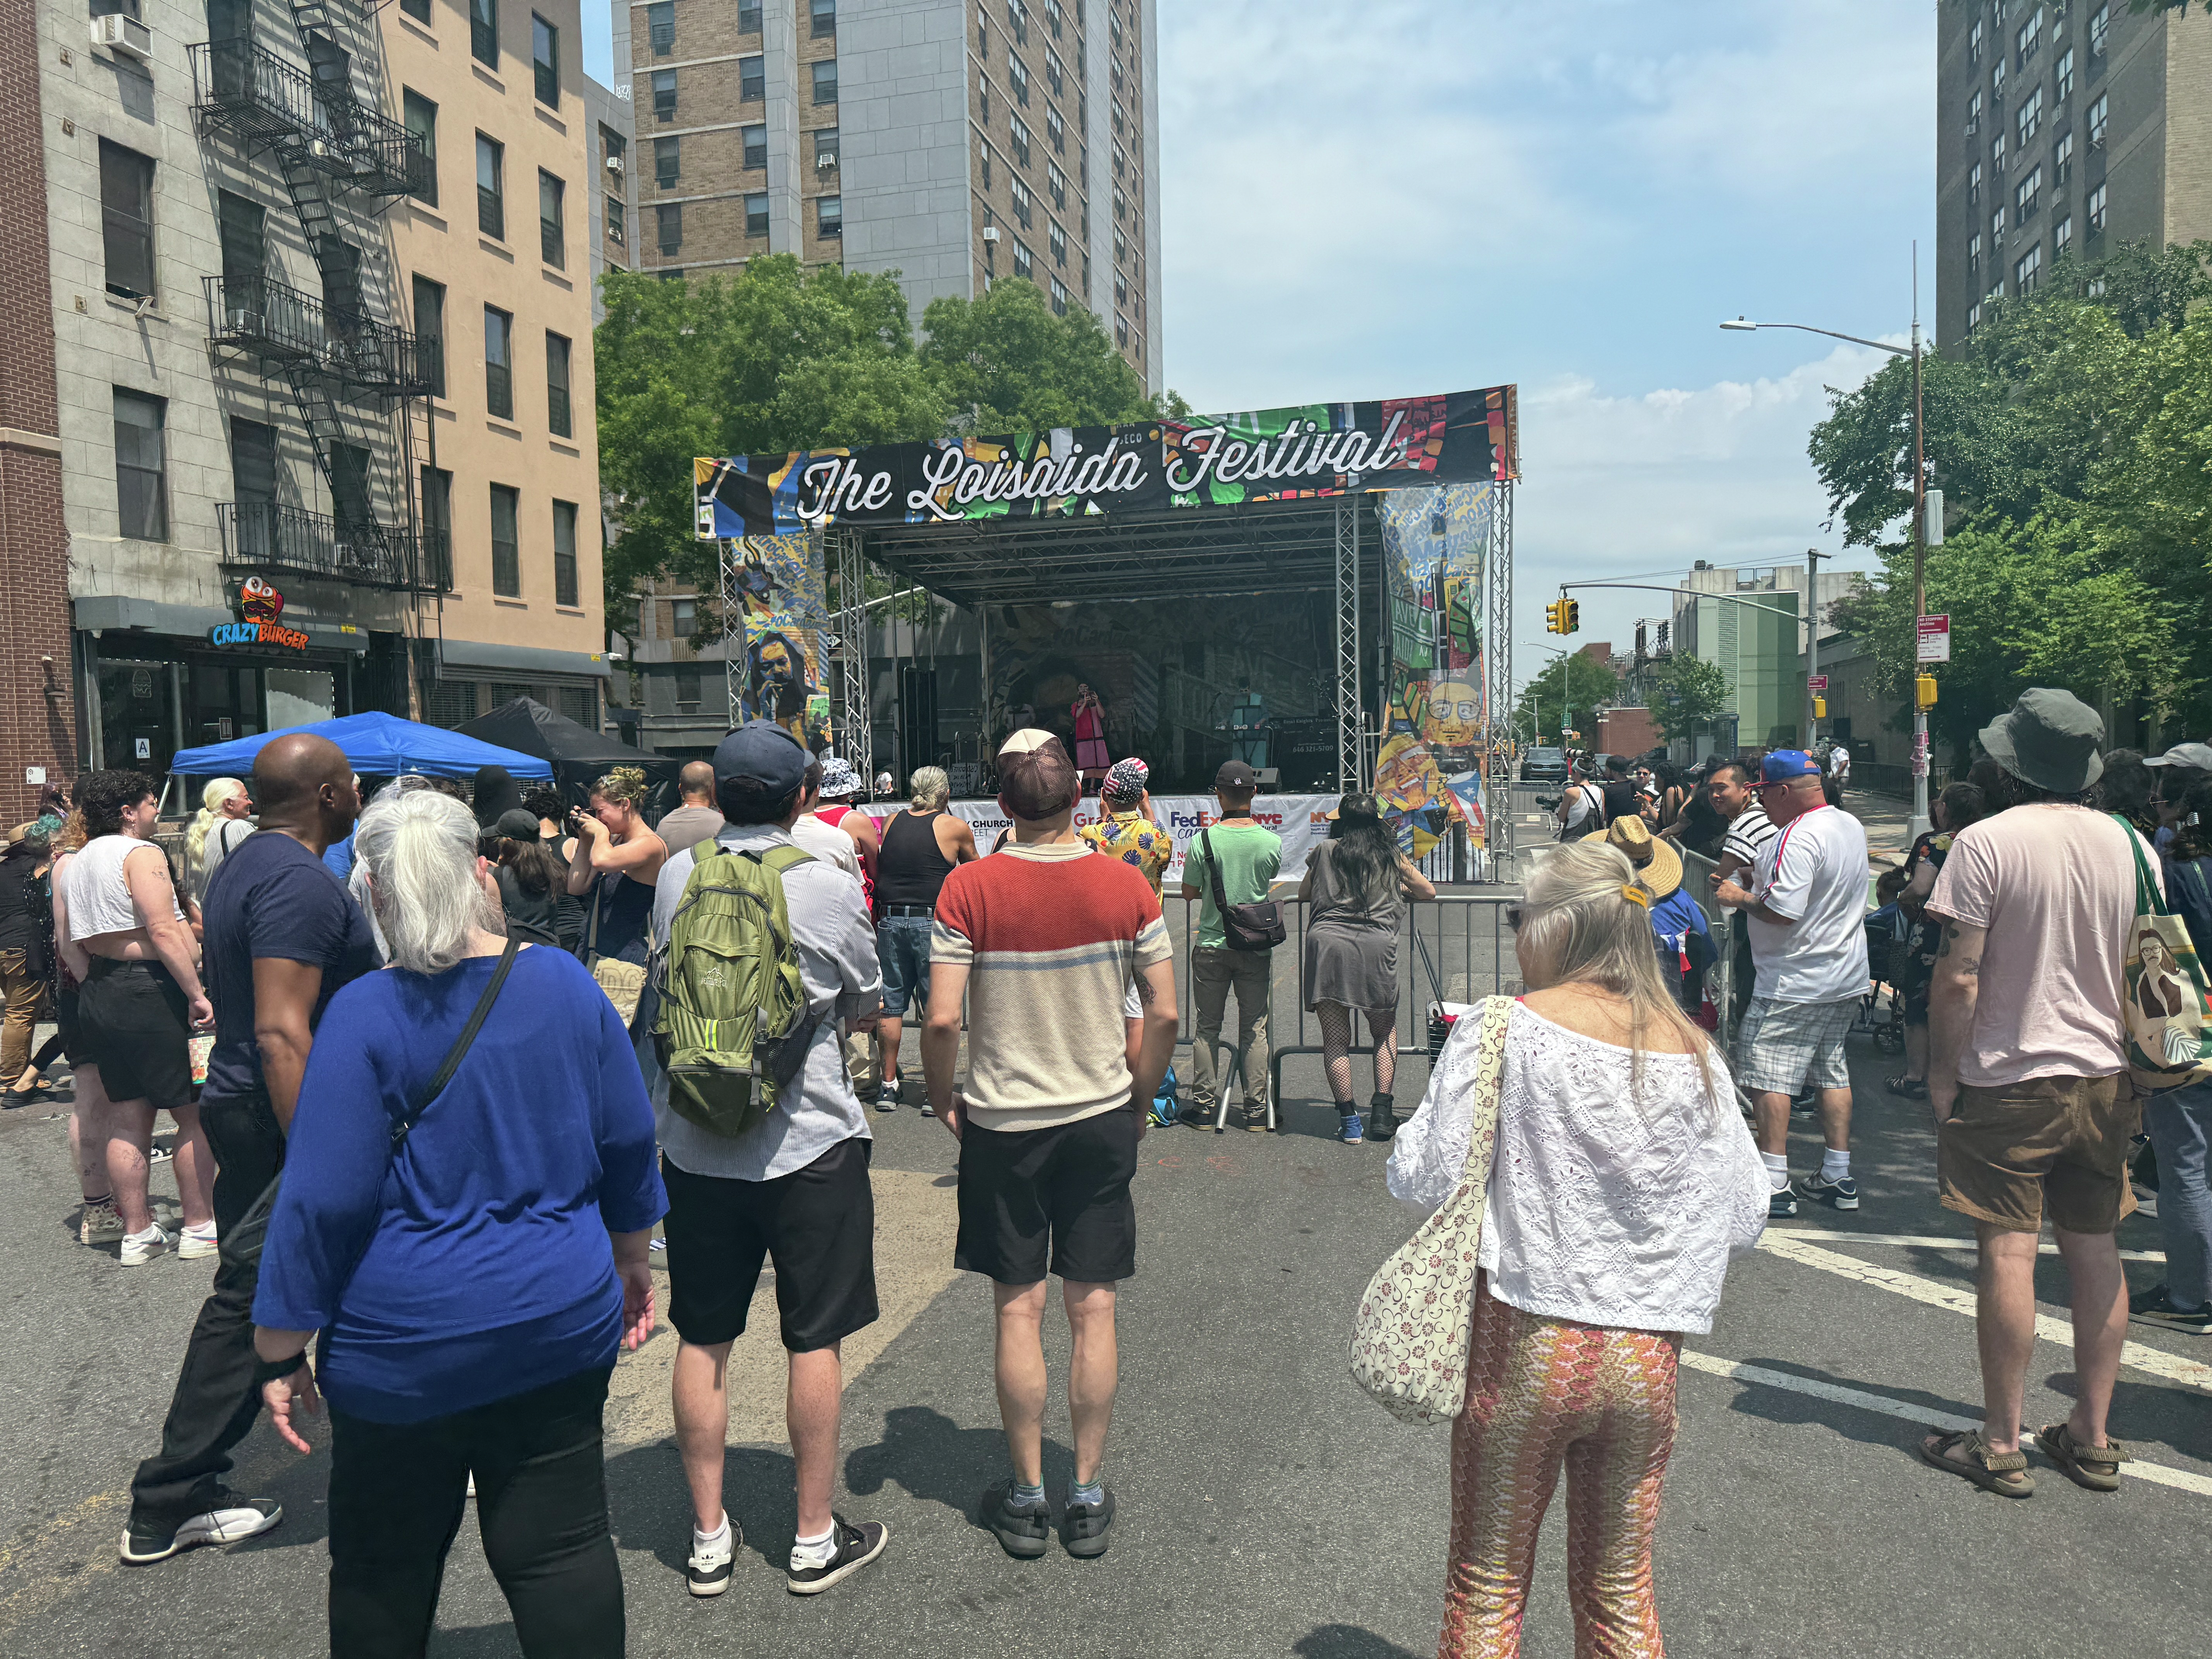 New Yorker's celebrate Puerto Rican and Latinx communities at the 37 annual Loisaida festival in the Lower East Side